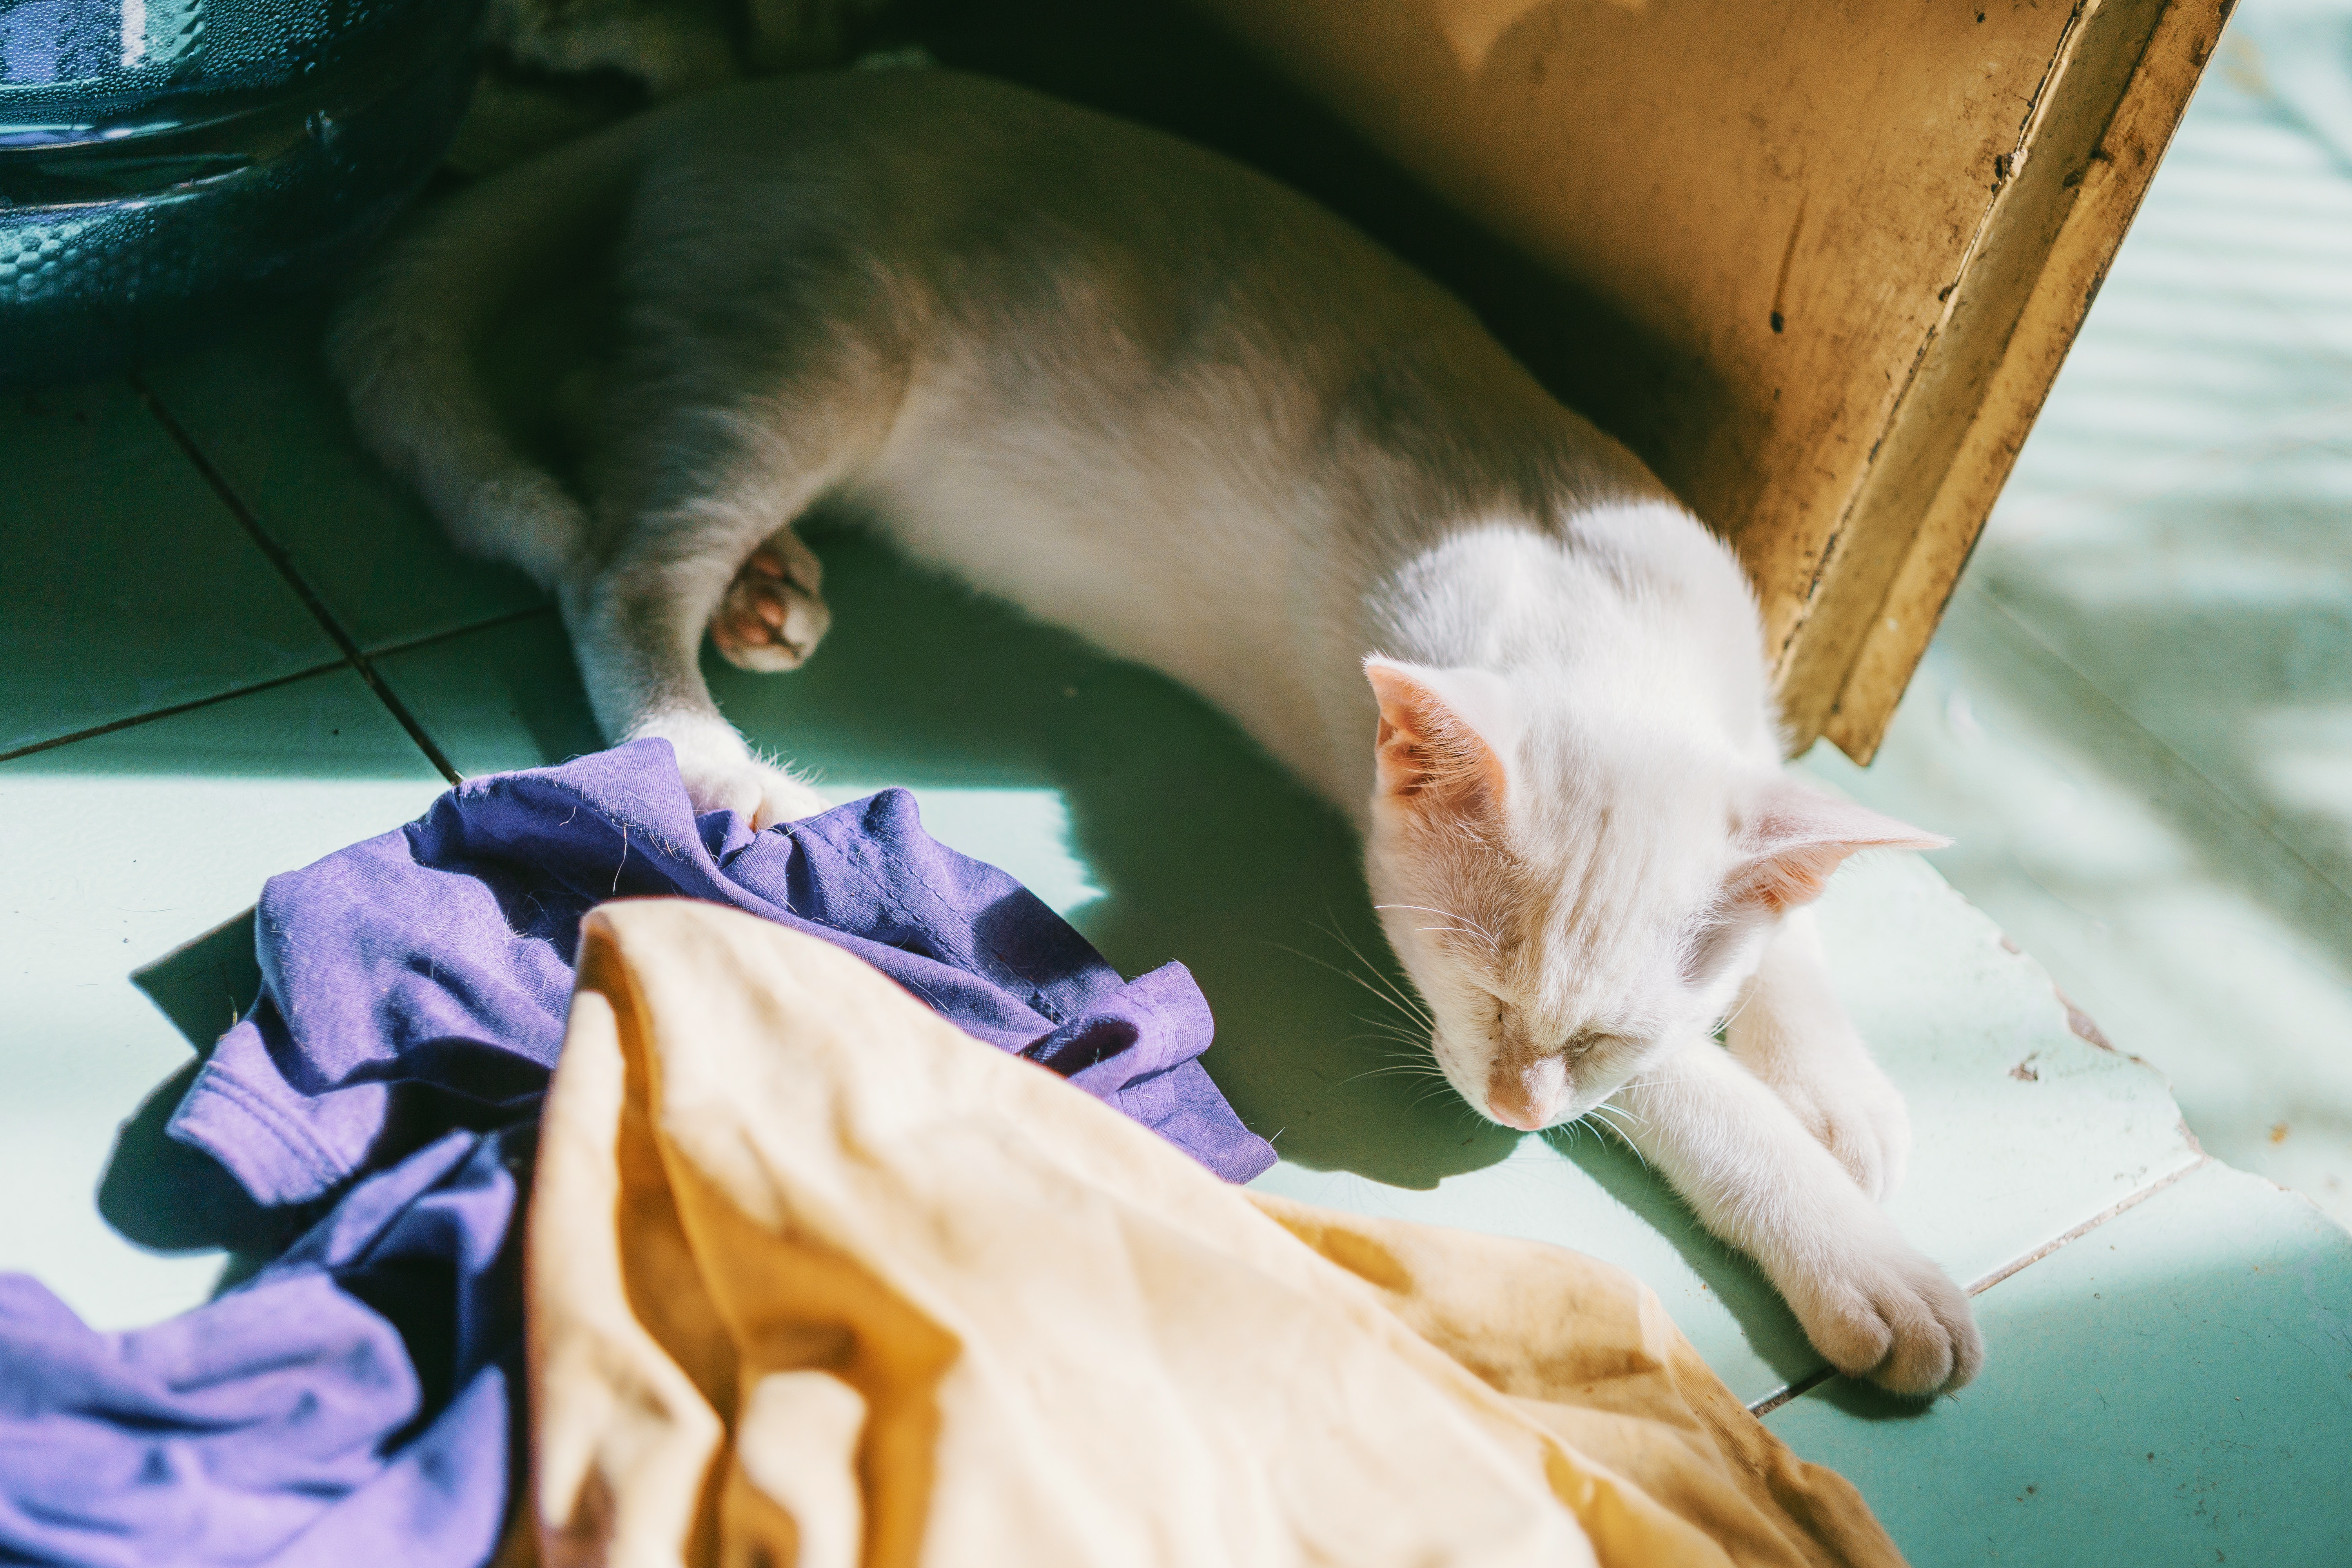 White Cat Near Door and Assorted Textiles, Adorable, Kitten, Whiskers, Tabby, HQ Photo